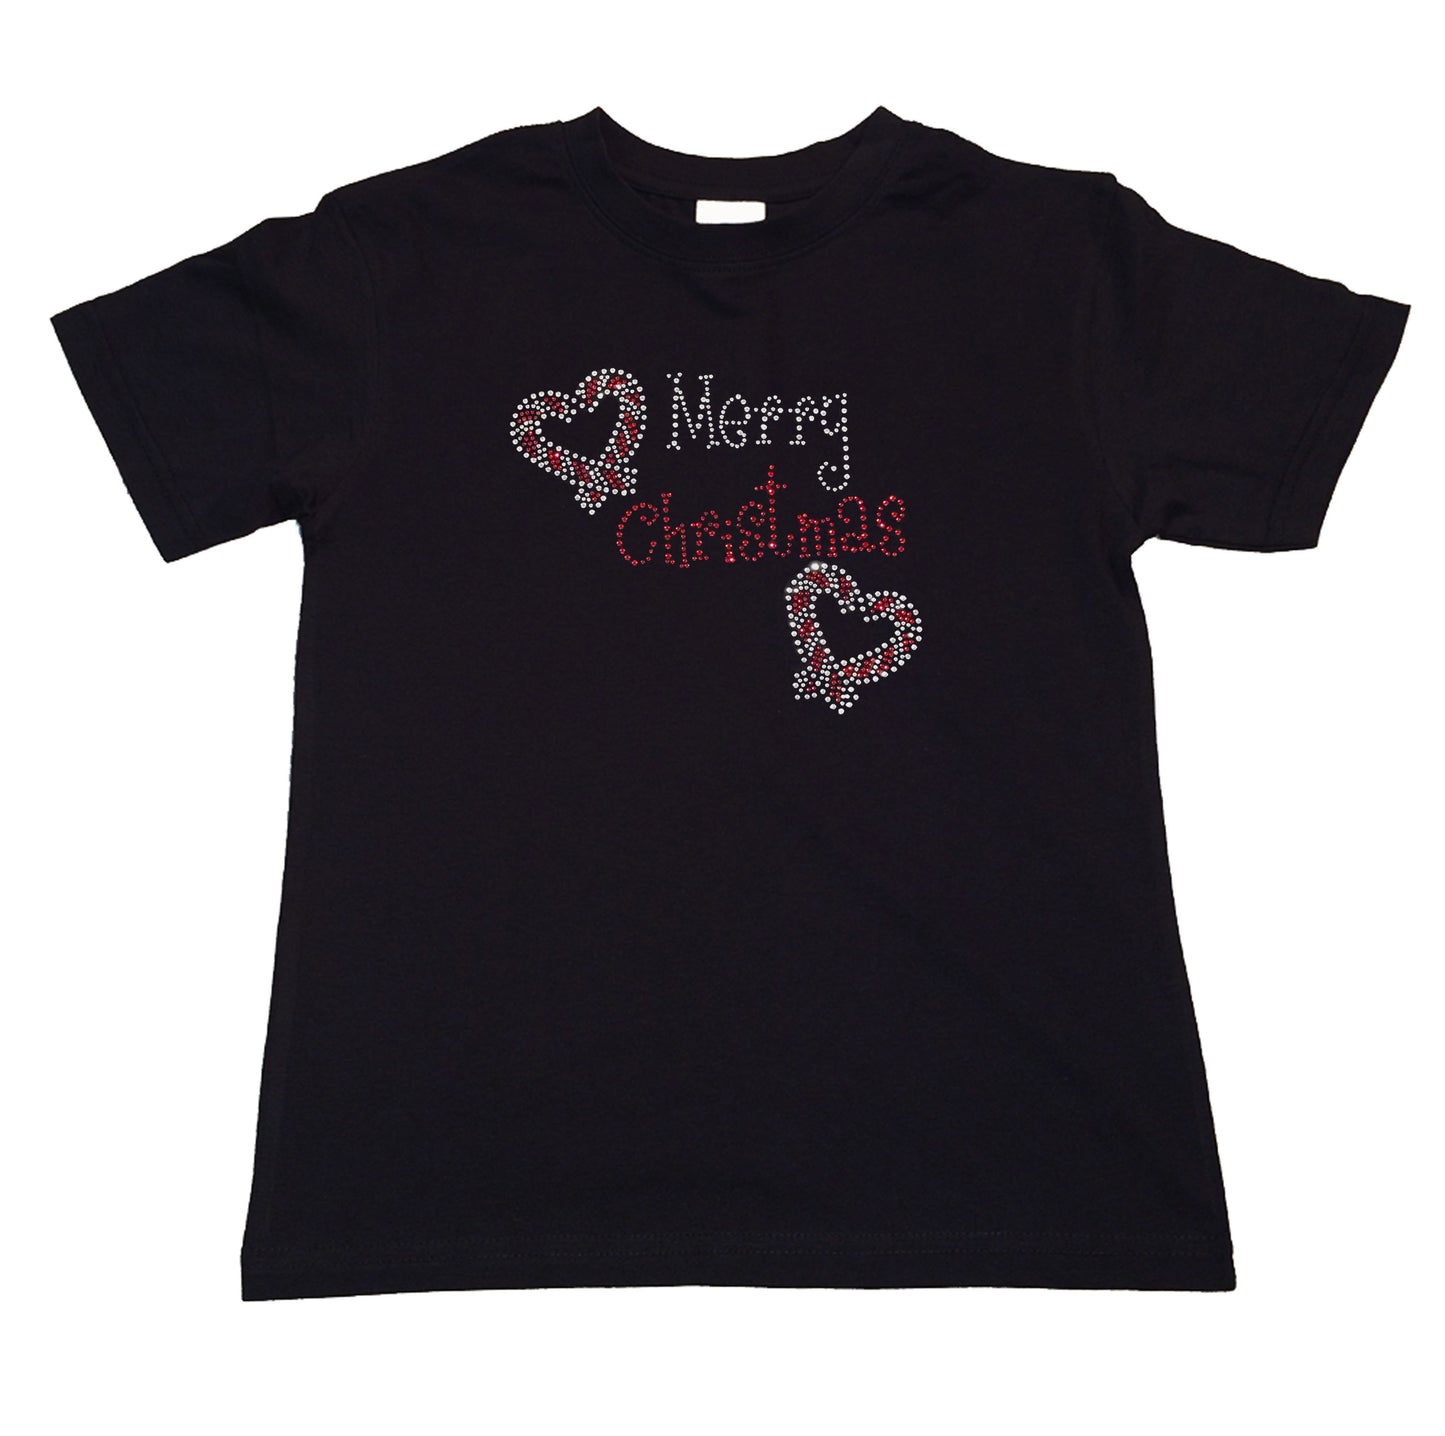 Girls Rhinestone T-Shirt " Merry Christmas with Heart Candy Cane in Rhinestones " Kids Size 3 to 14 Available